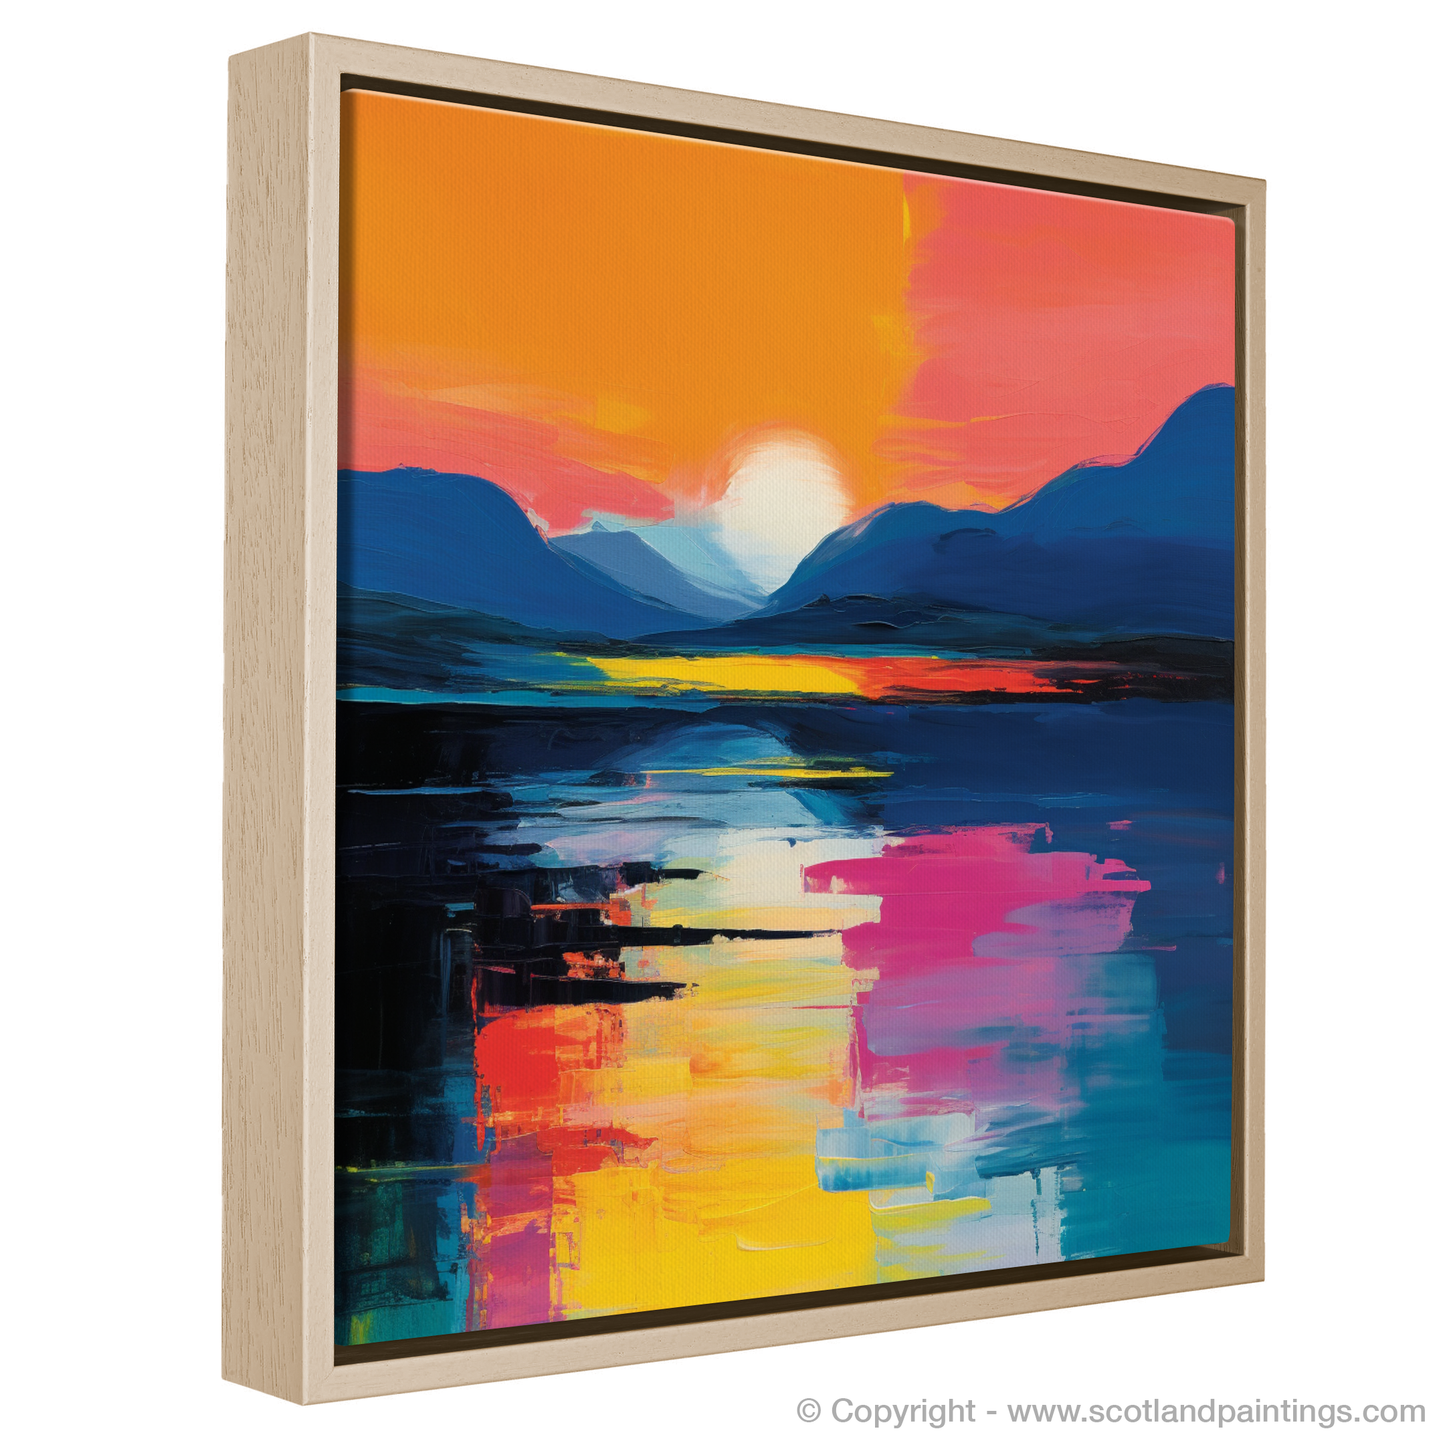 Painting and Art Print of Twilight reflections on Loch Lomond entitled "Twilight Reflections: An Abstract Journey Through Loch Lomond".